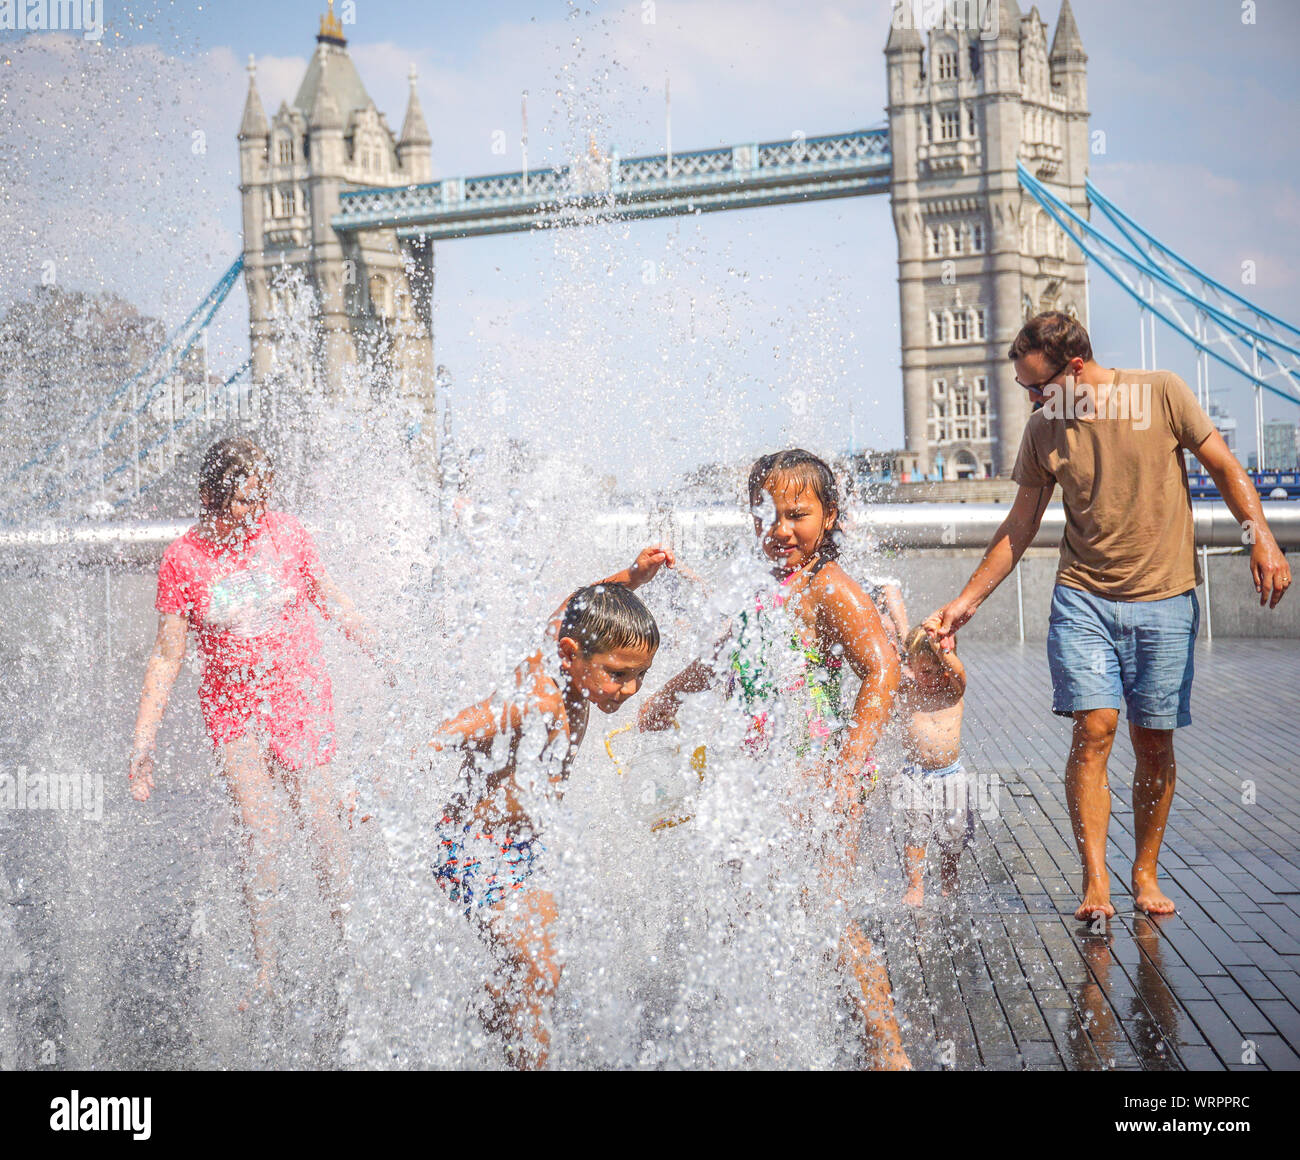 Kids seen playing at a water fountain and cooling down on a hot day on the  South Bank in Central London. Photo by Ioannis Alexopoulos / Alamy Stock  Photo - Alamy